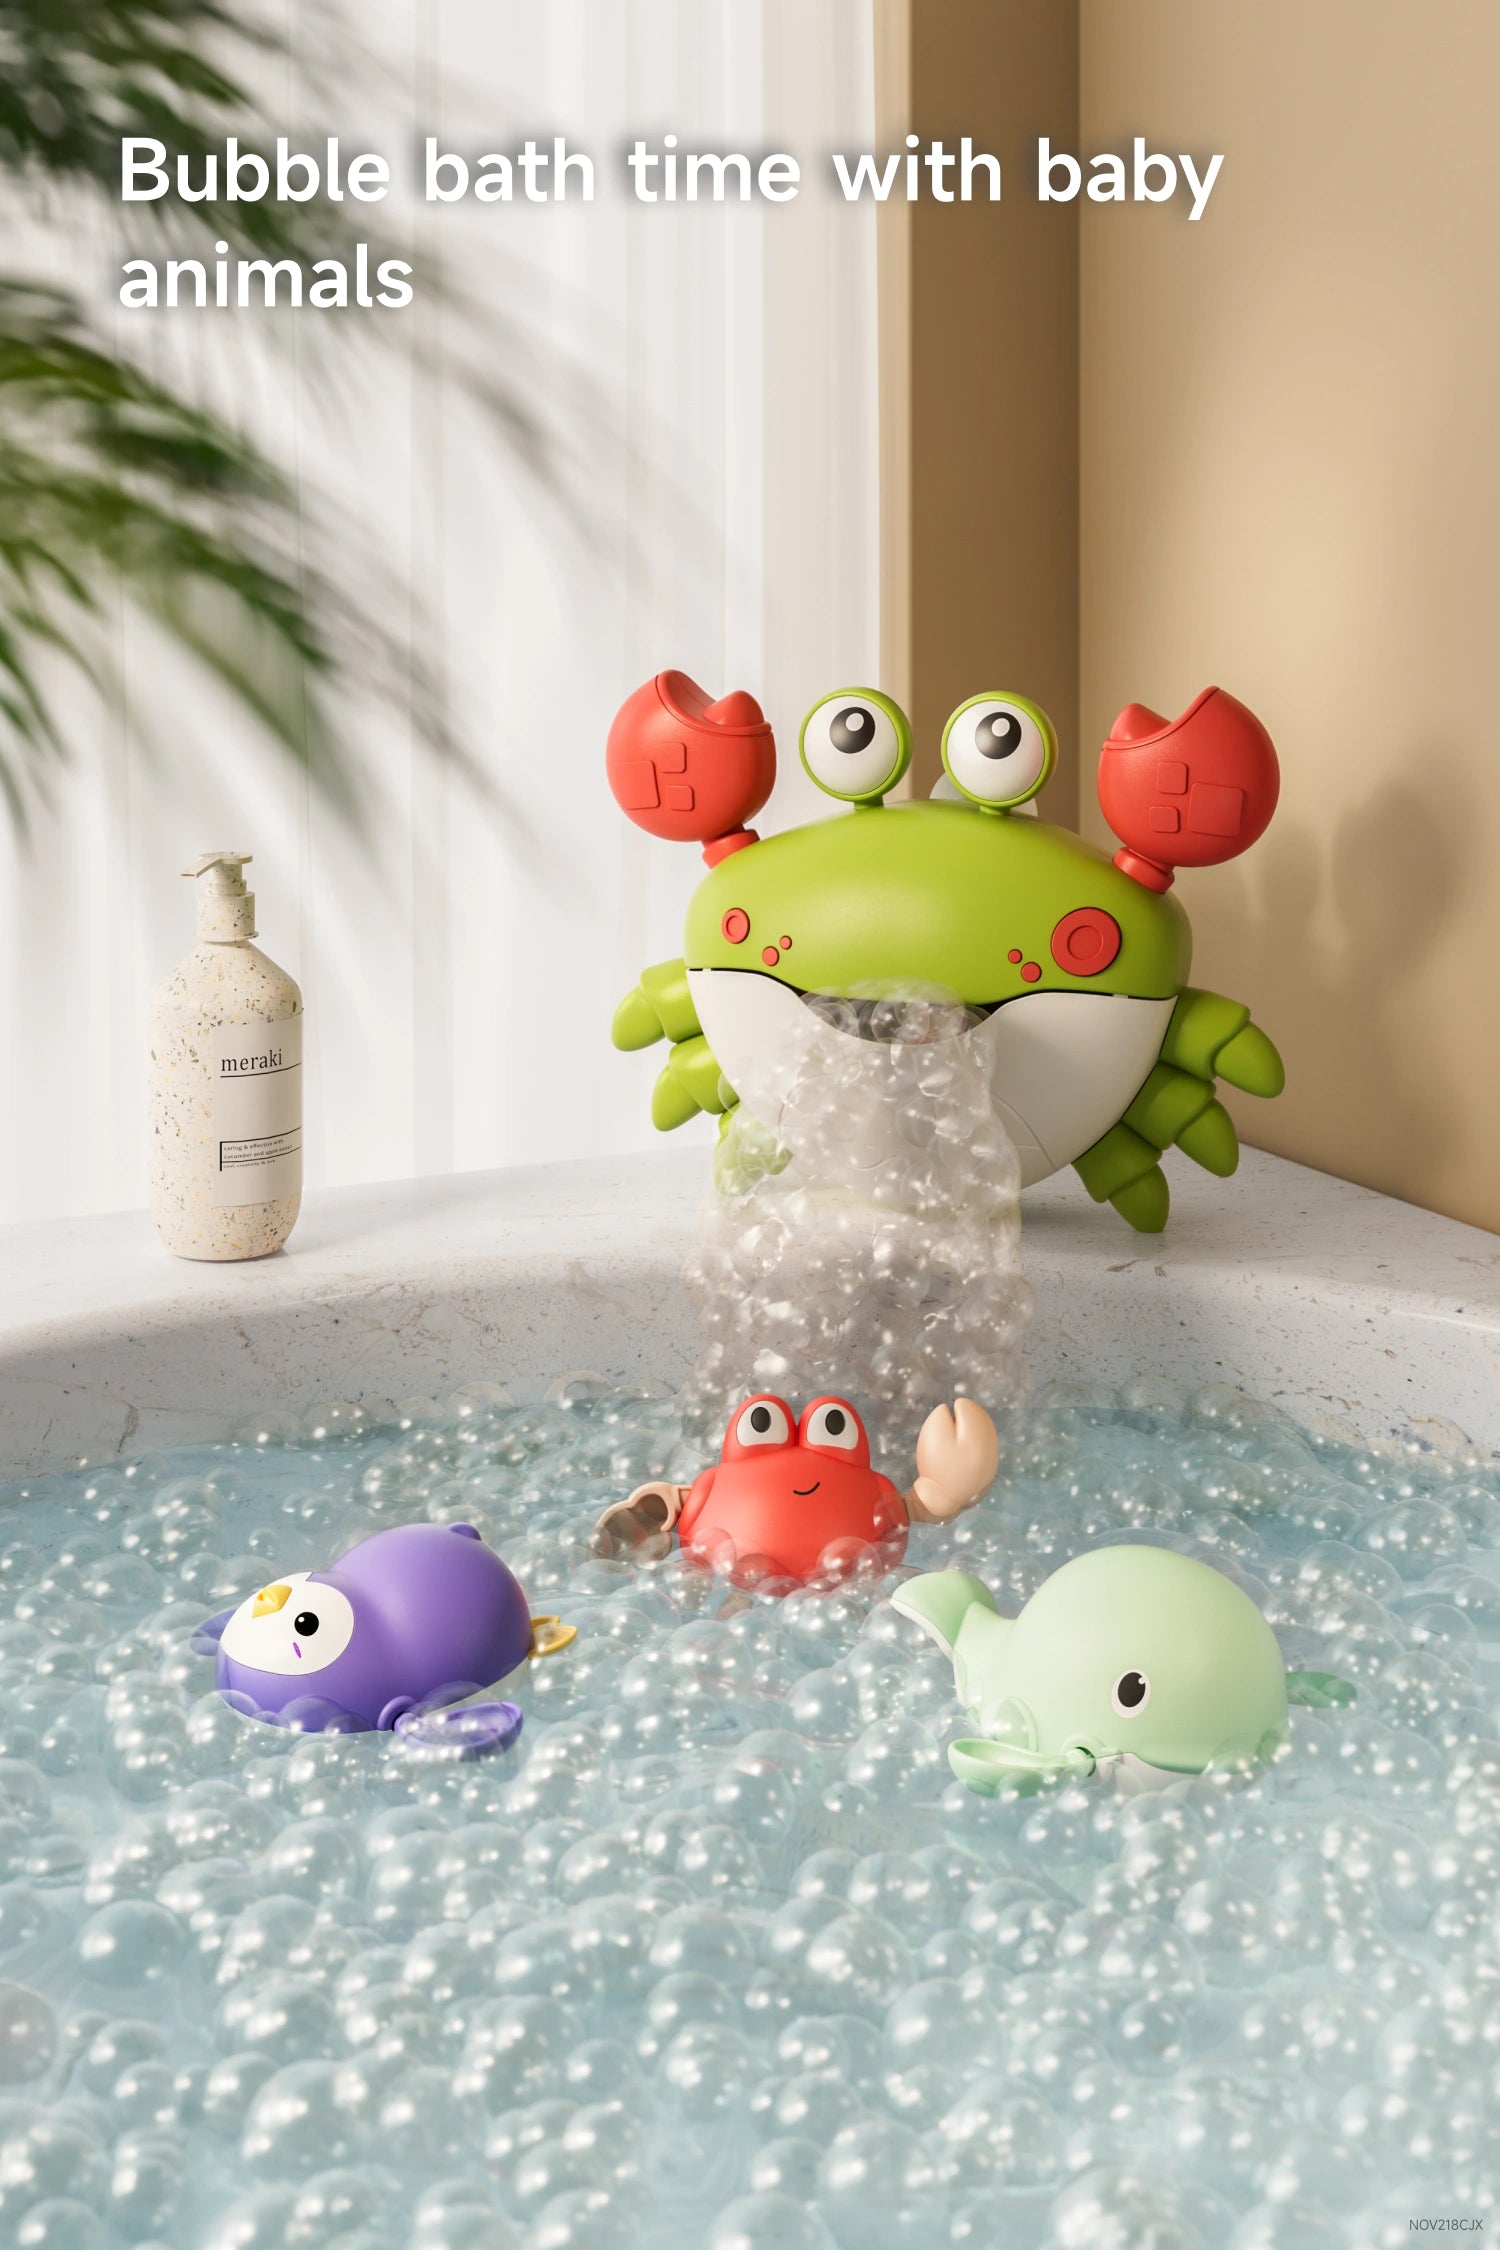 3 wind up toys for added fun in the bathtub